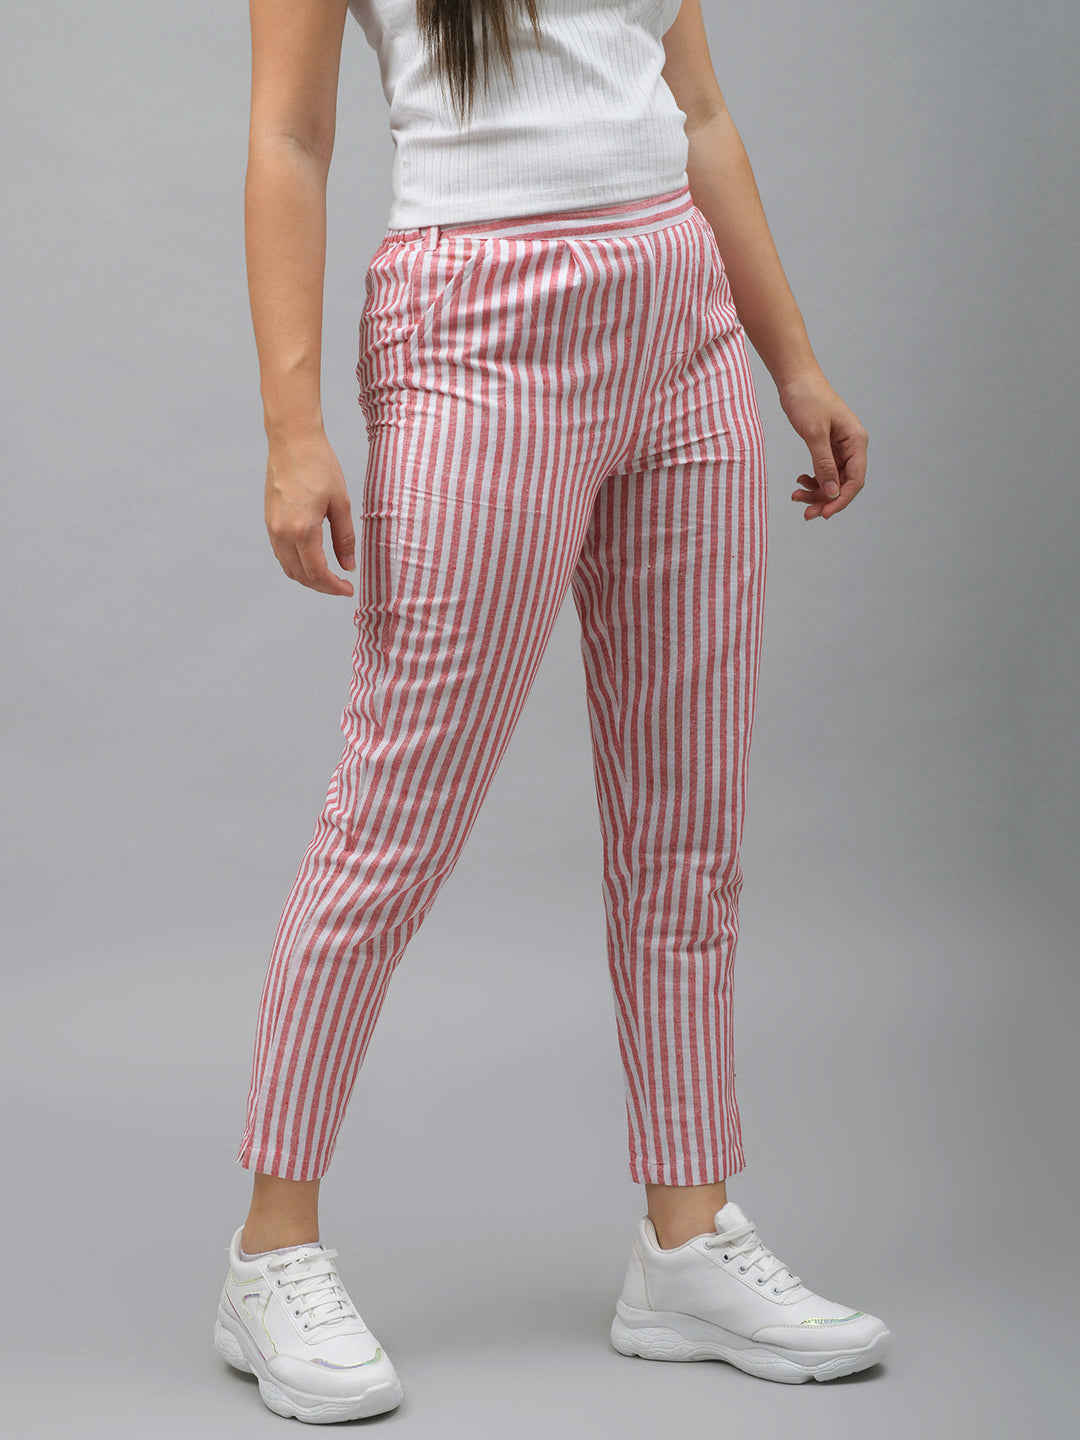 Me Craft Women Regular Fit Red Striped Cotton Blend Trousers